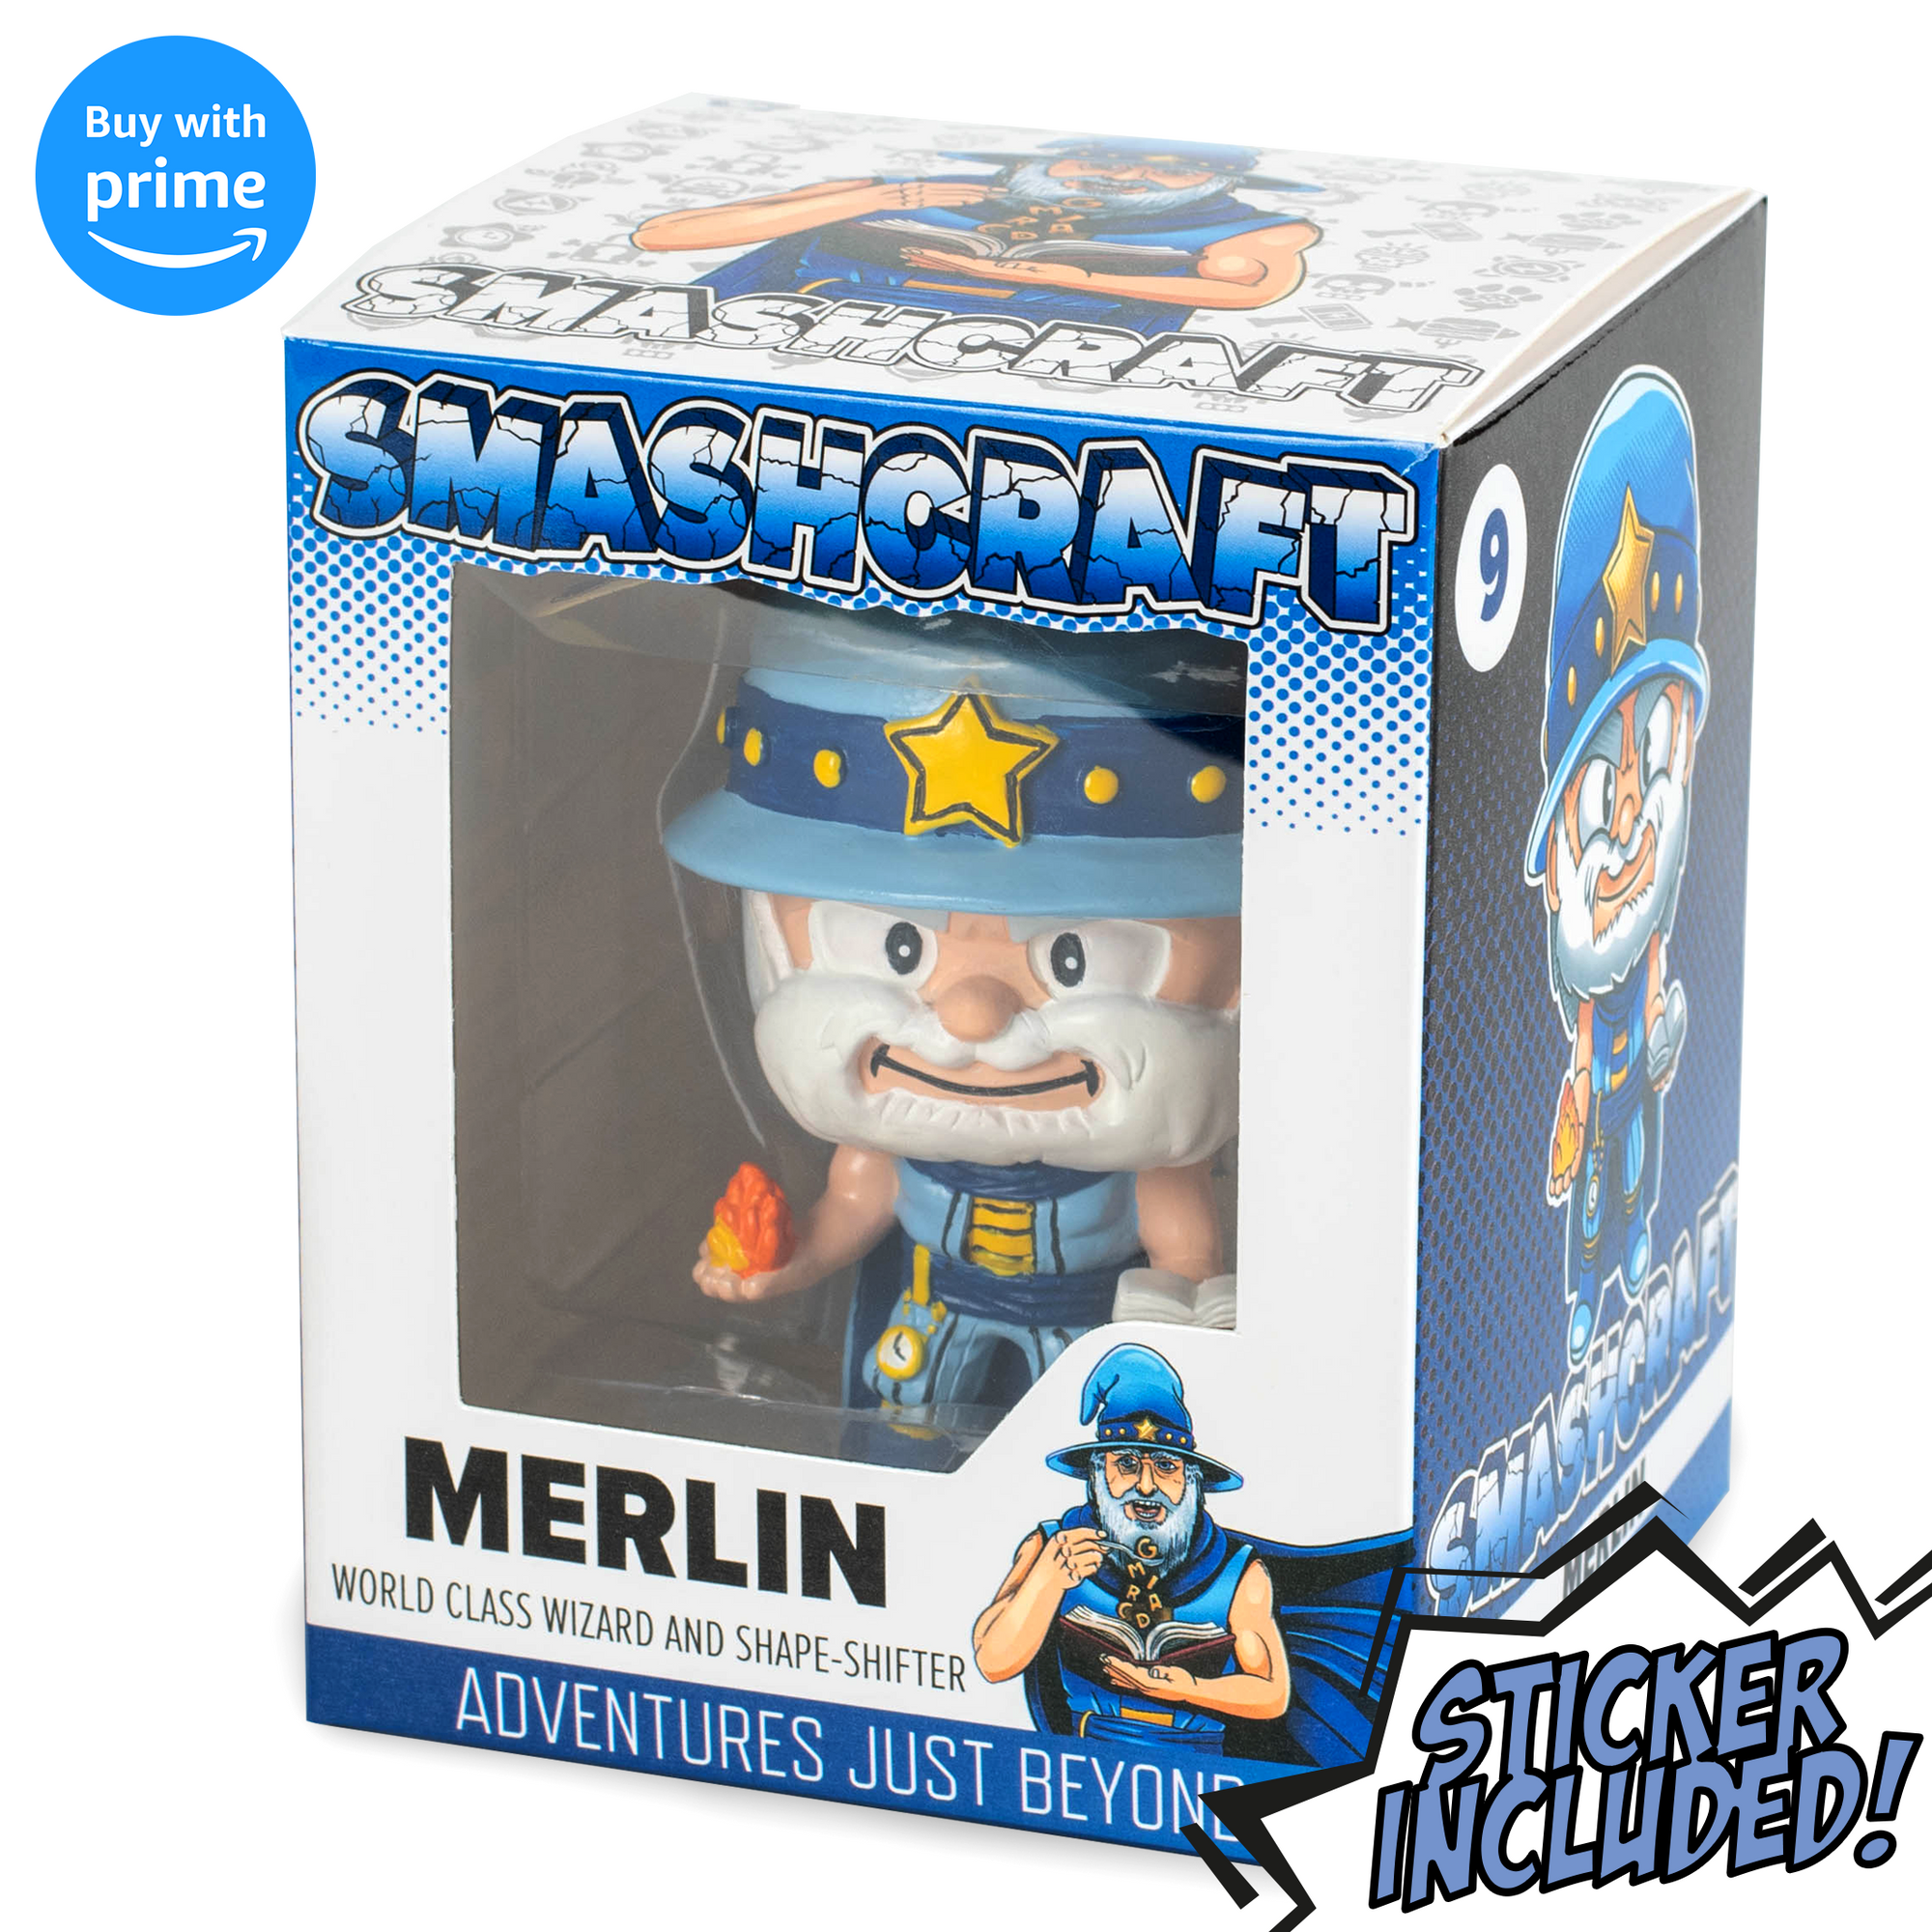 Smashcraft Merlin collectors box, with back story and memorabilia legend character sticker